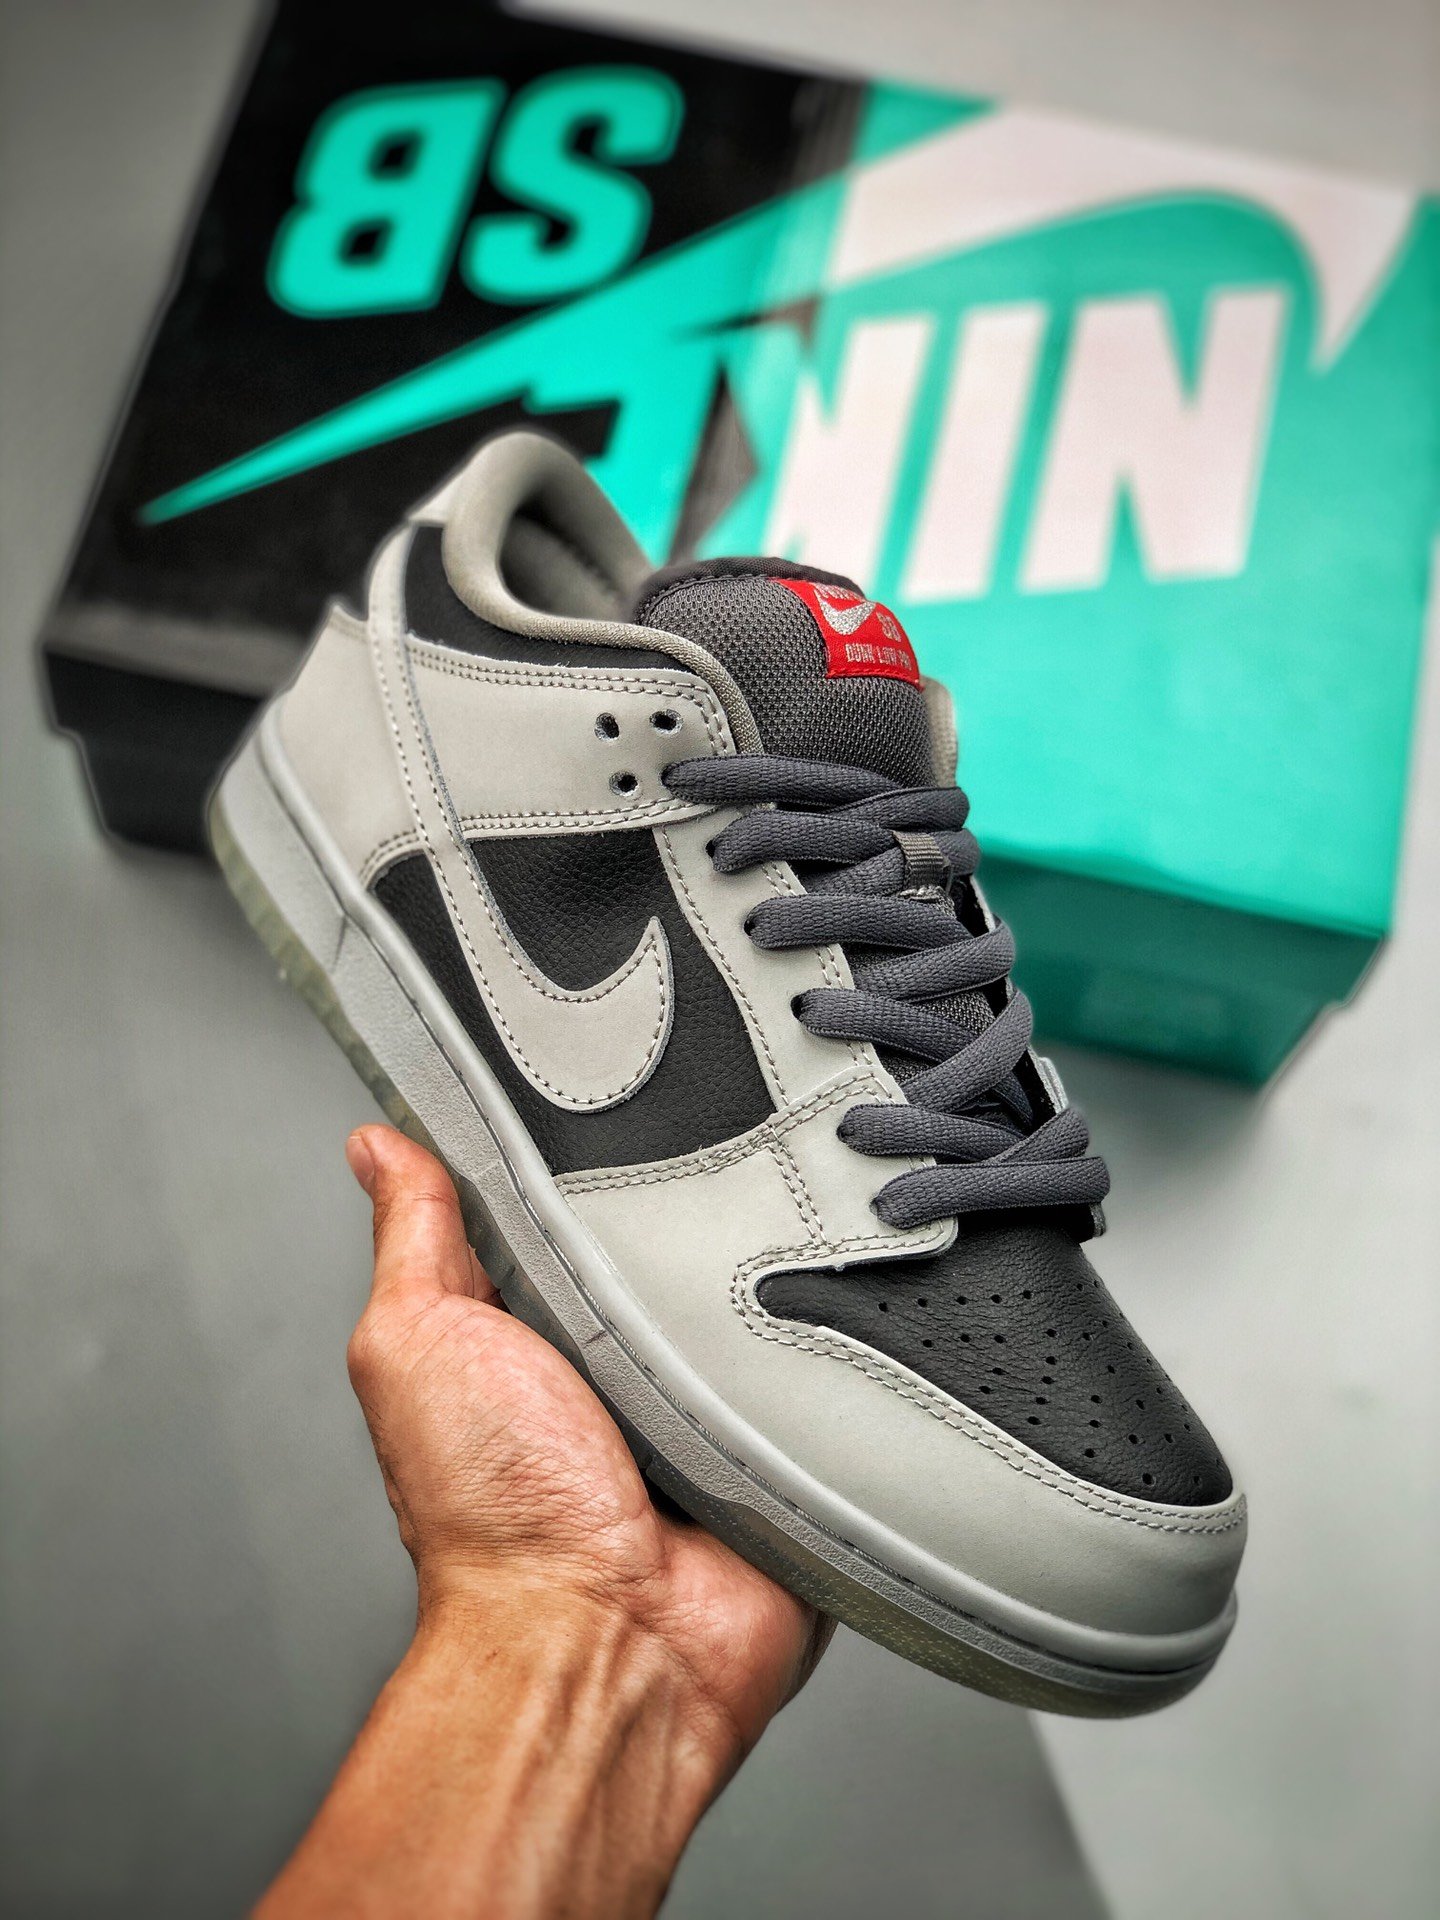 Atlas x Nike SB Dunk Low Wolf Grey/Black-Challenge Red Shoes